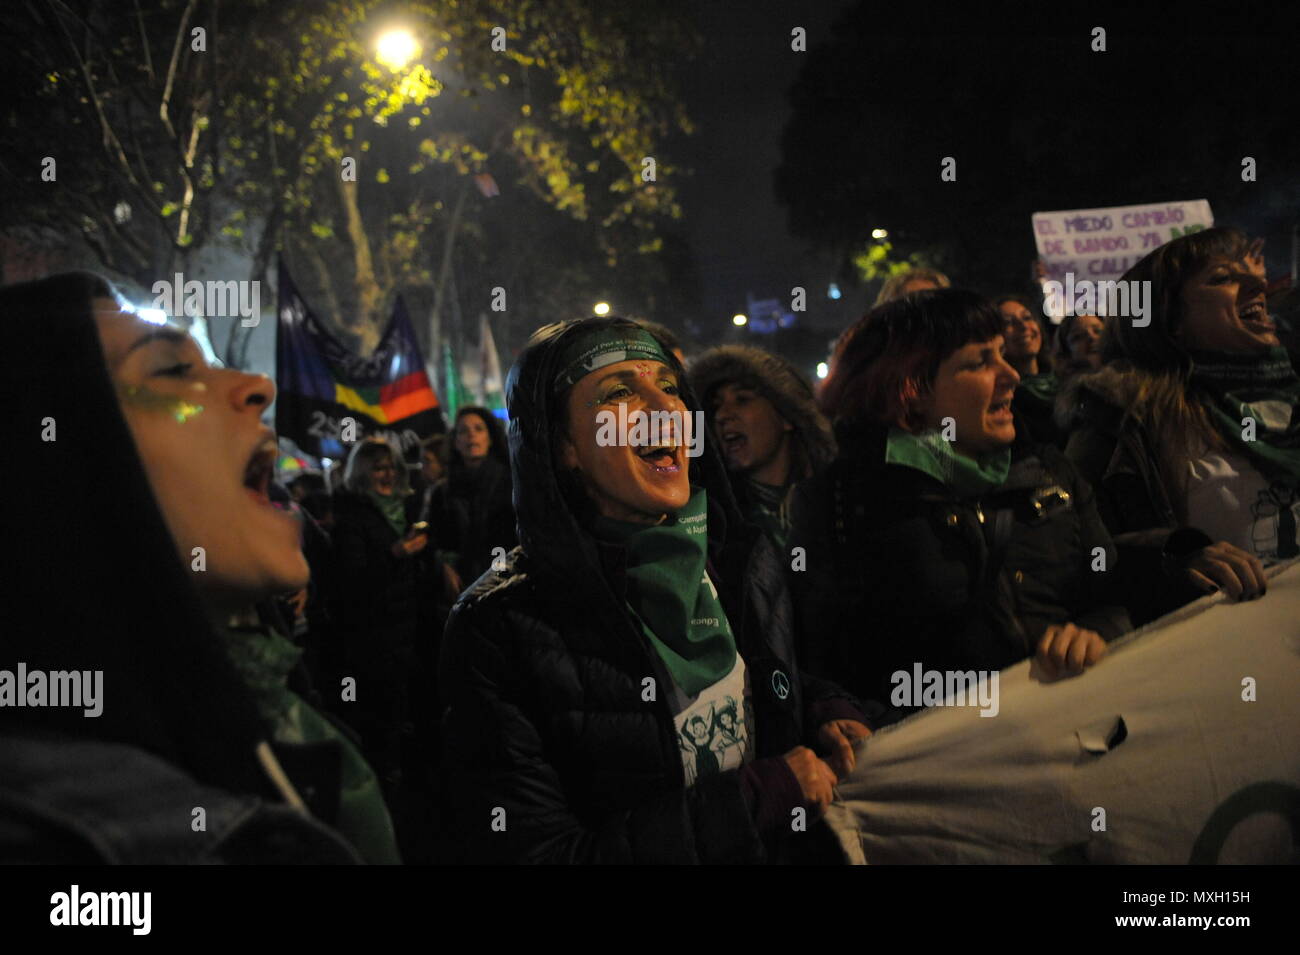 Buenos Aires, Buenos Aires, Argentina. 4th June, 2018. Women bearing the pro abortion symbol, a green kerchief, sing and shout during the ''Ni una menos'' rally. ''Ni una menos'', Spanish for ''Not one woman less'' is an Argentine feminist movement that started in 2015 after the murder of 14 years old Chiara Paez, and is now spread across several Latin American countries, campaigning against gender violence. Credit: Patricio Murphy/ZUMA Wire/Alamy Live News Stock Photo